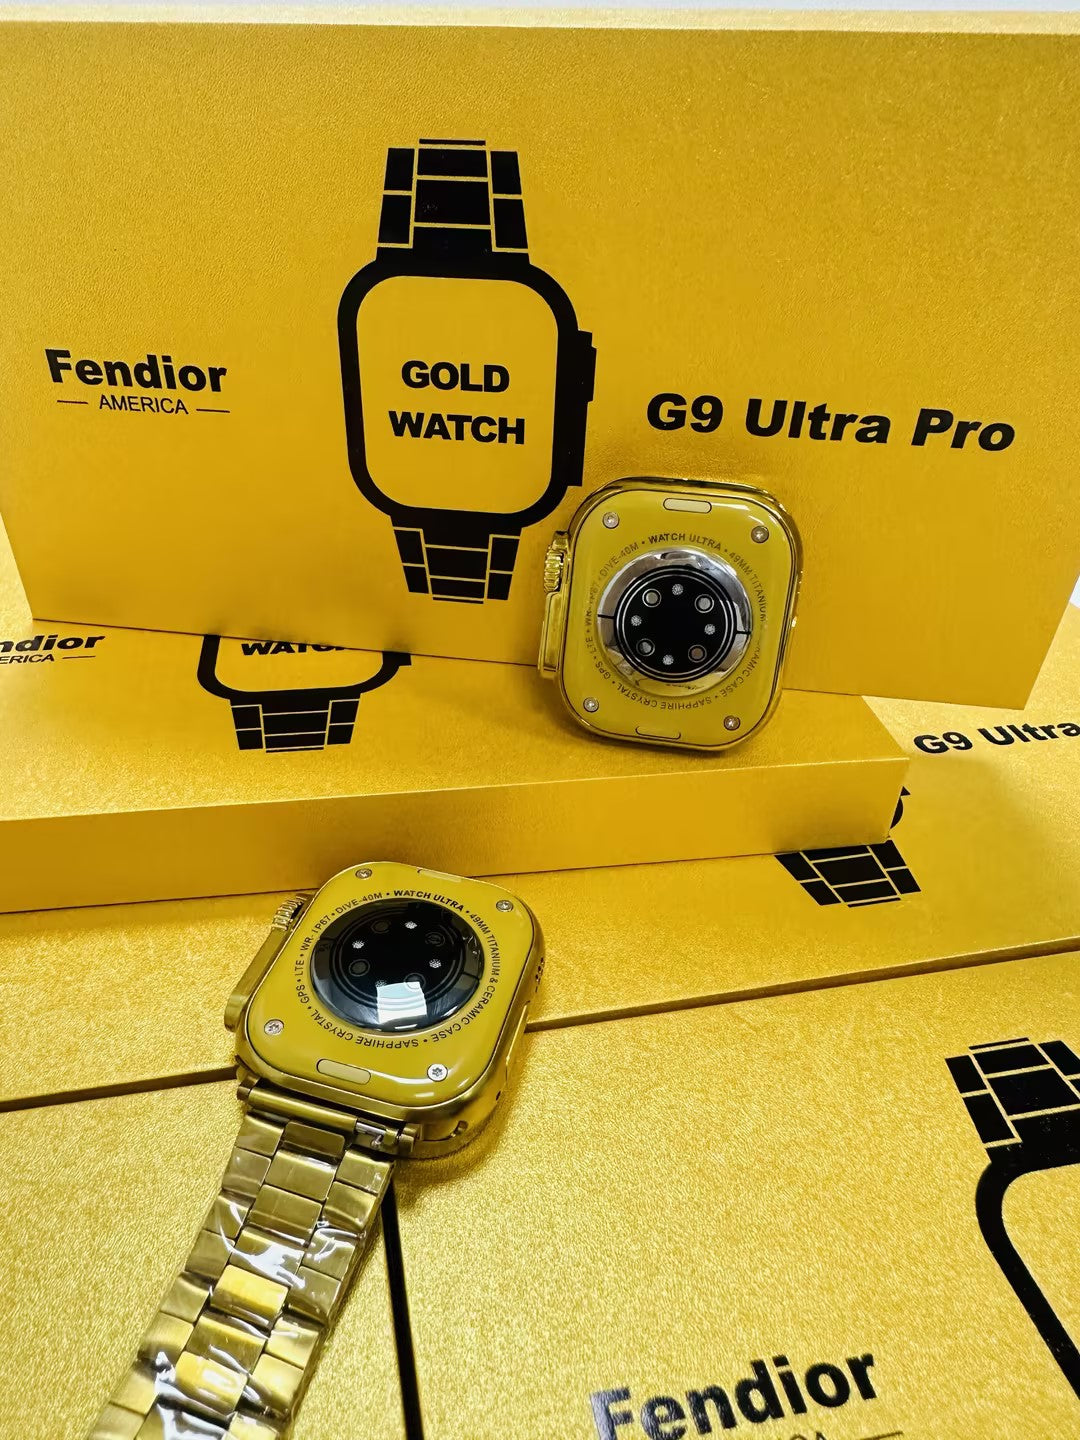 G9 Ultra Pro / S9 Ultra Max Smart Watch (Golden Edition) - 49MM Ultra Series 8 - NFC - Bluetooth Call - Customize Wallpaper - Wireless Charging - Real Screws and Straps Locks